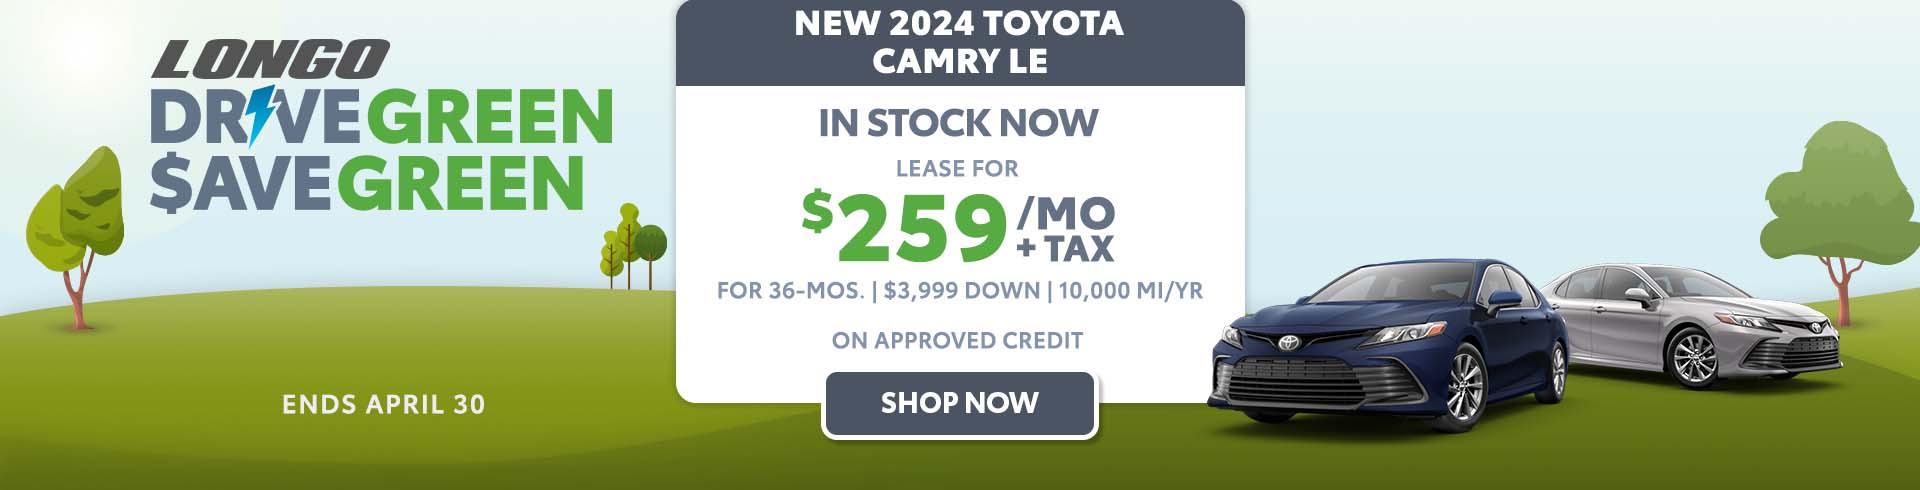 Lease a new 2024 Toyota Camry LE for $259/mo + tax